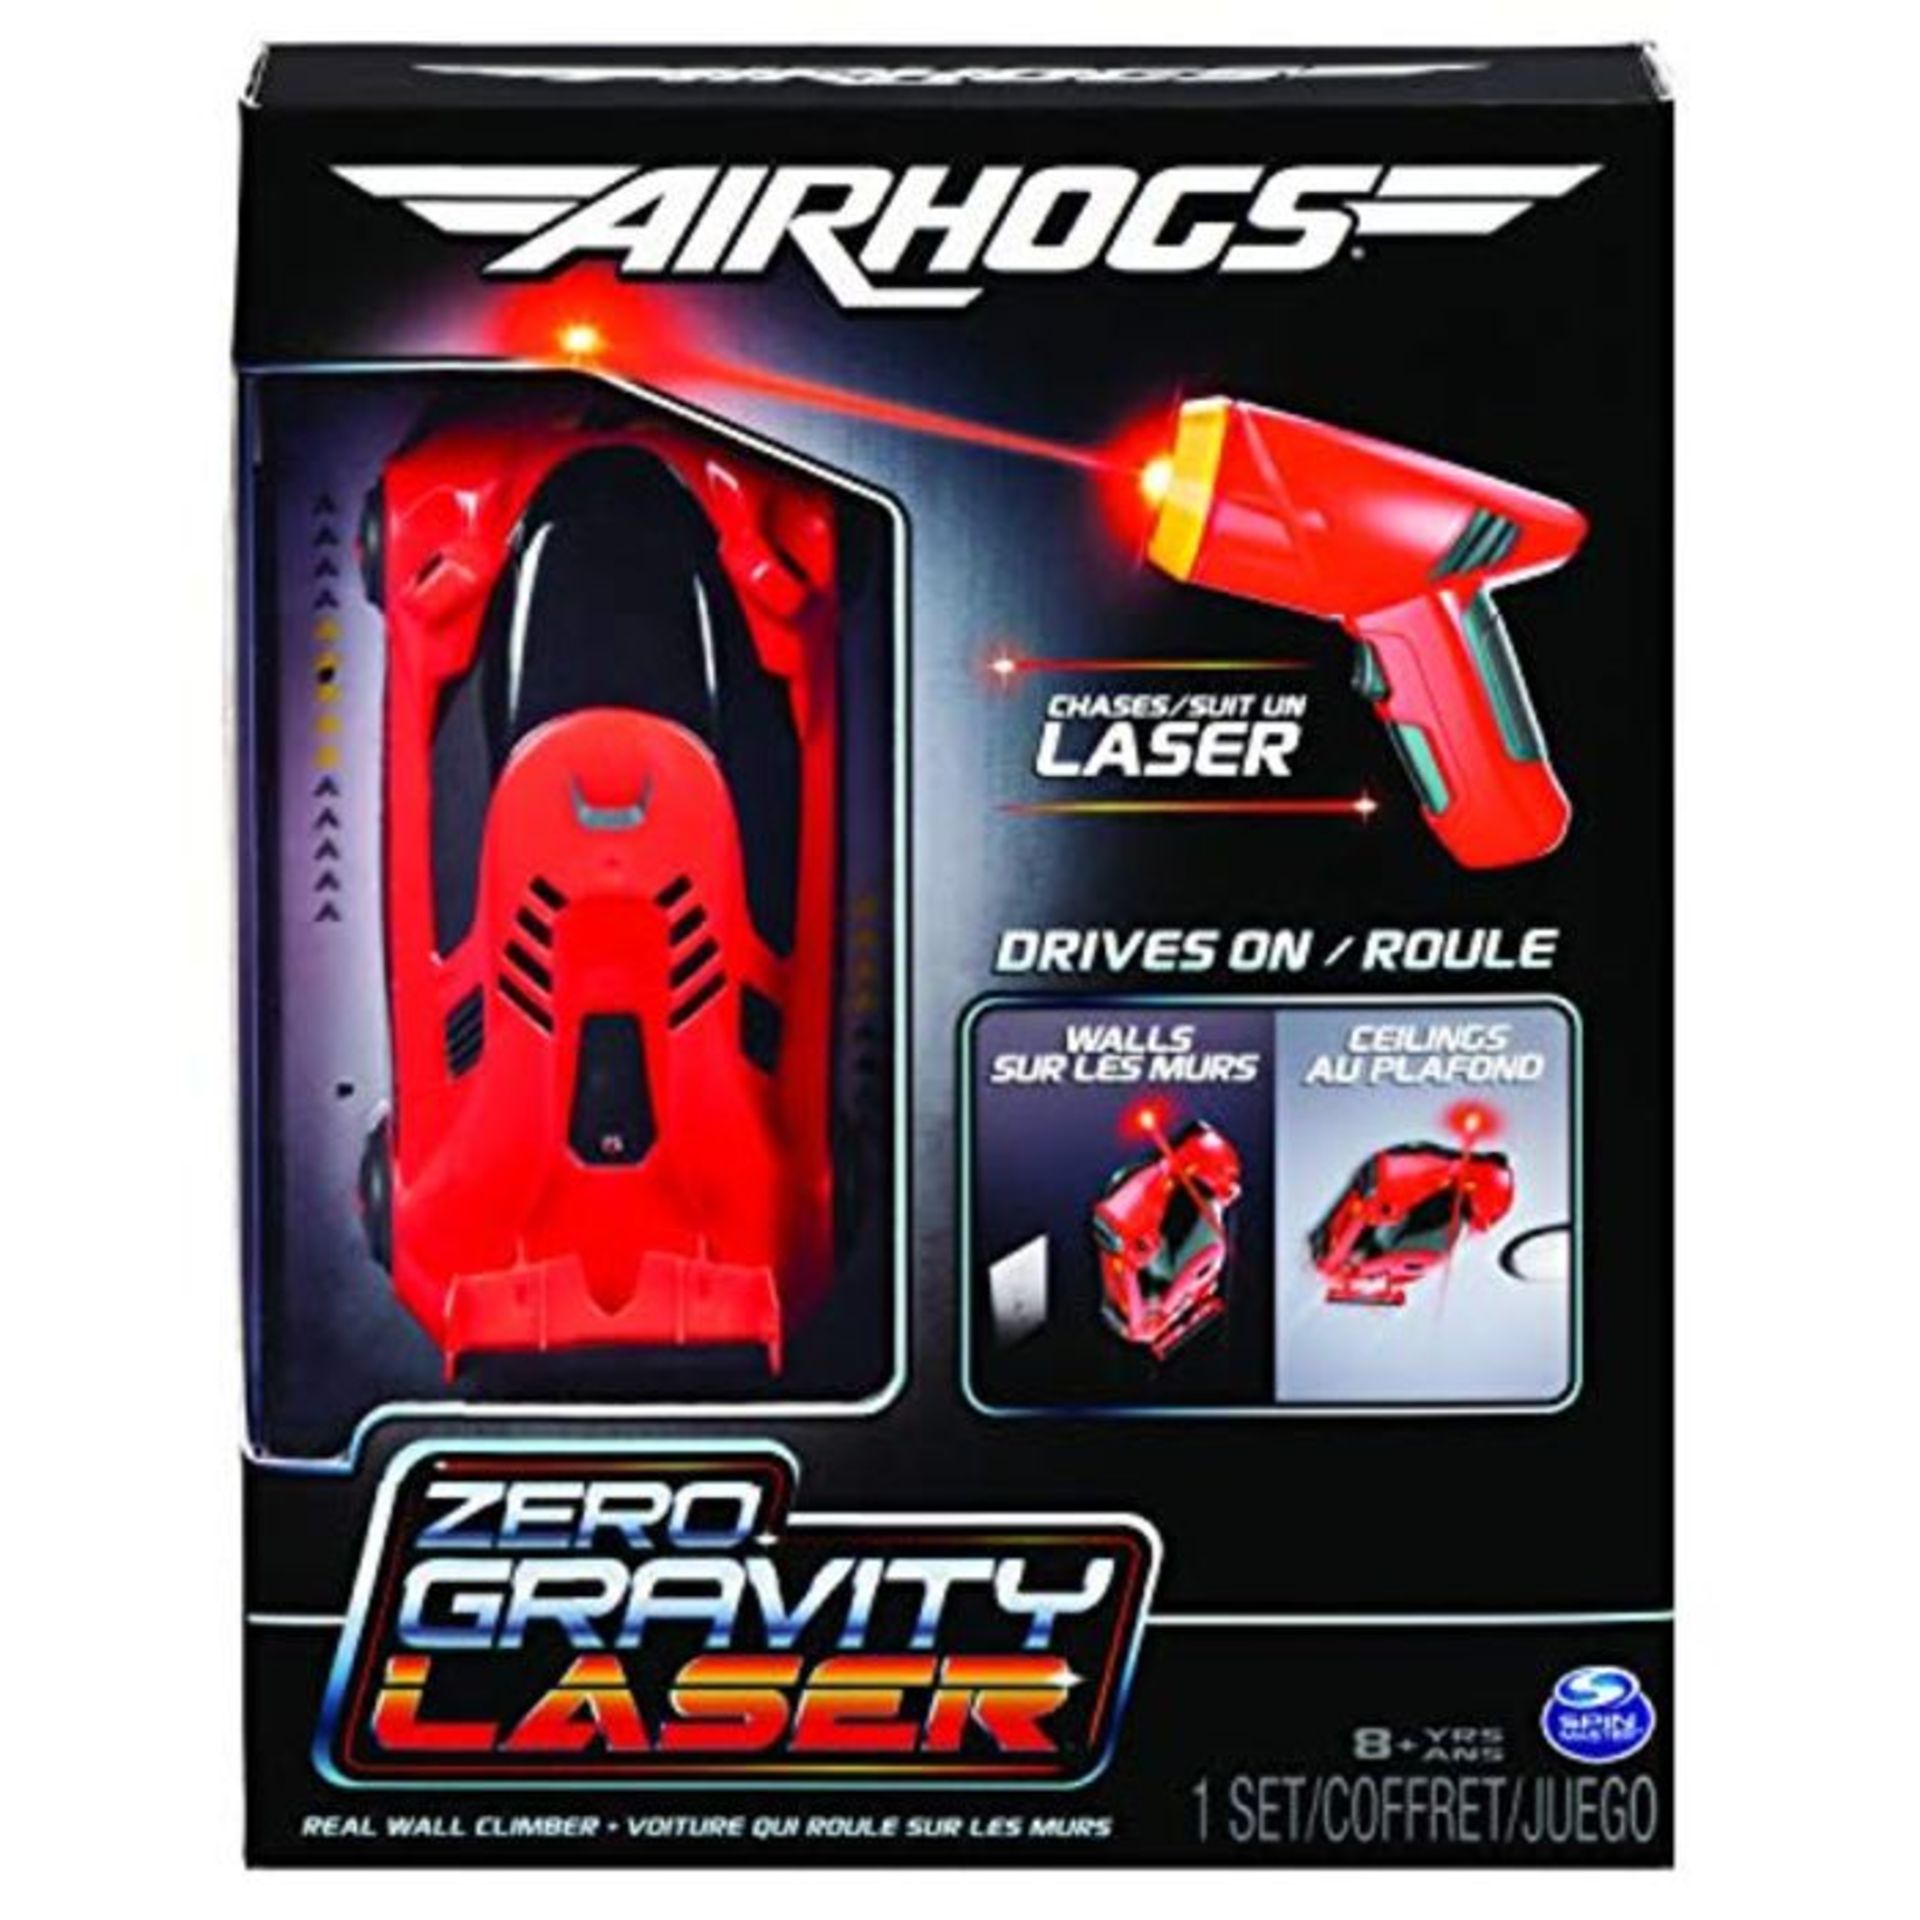 Air Hogs Zero Gravity Laser, Laser-Guided Real Wall-Climbing Race Car, Red